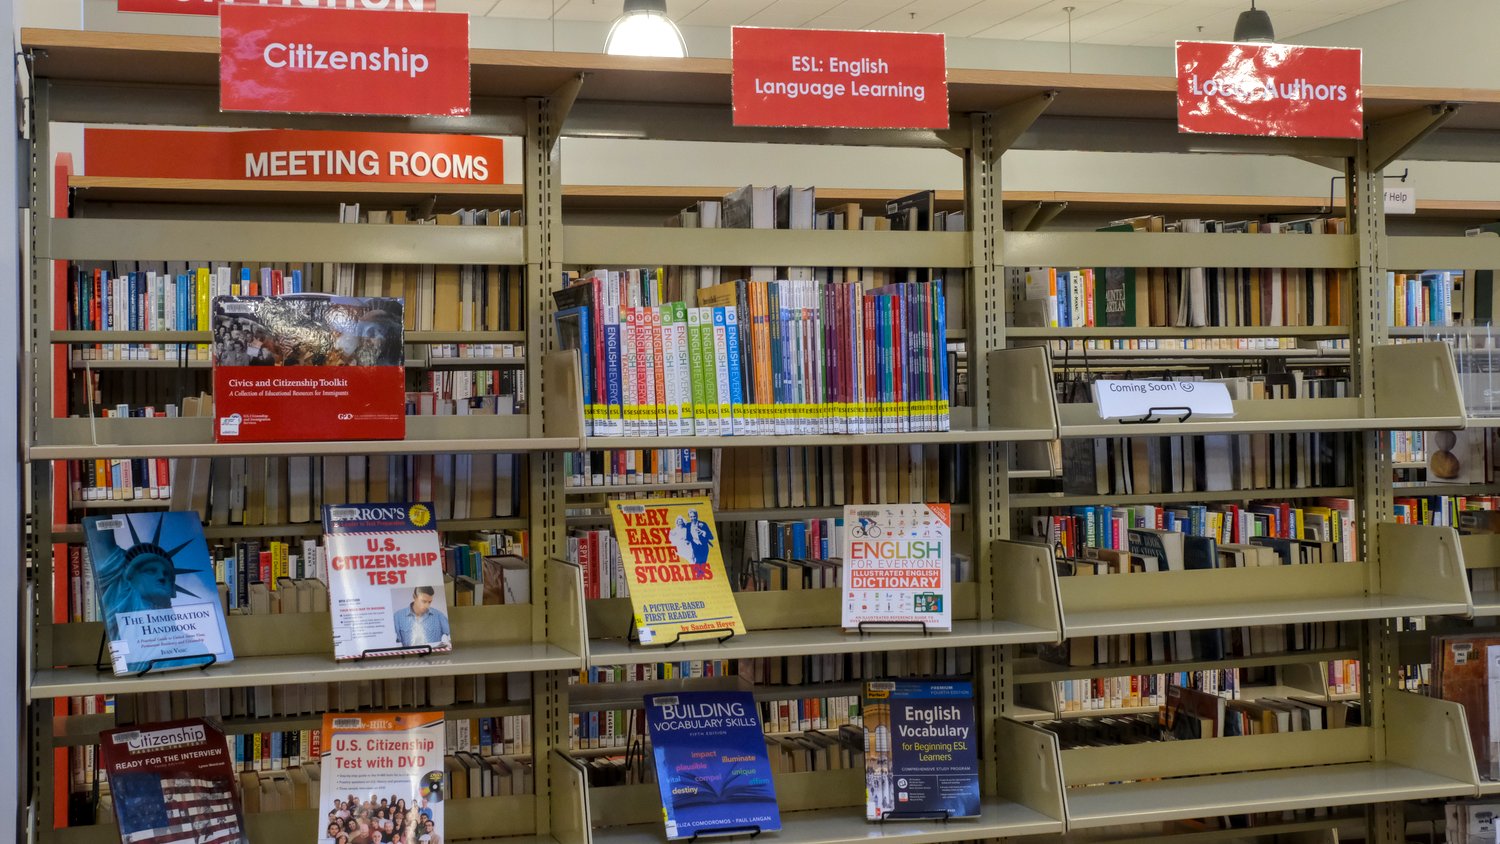 New citizenship, ESL English Language Learning, and Local Authors sections.